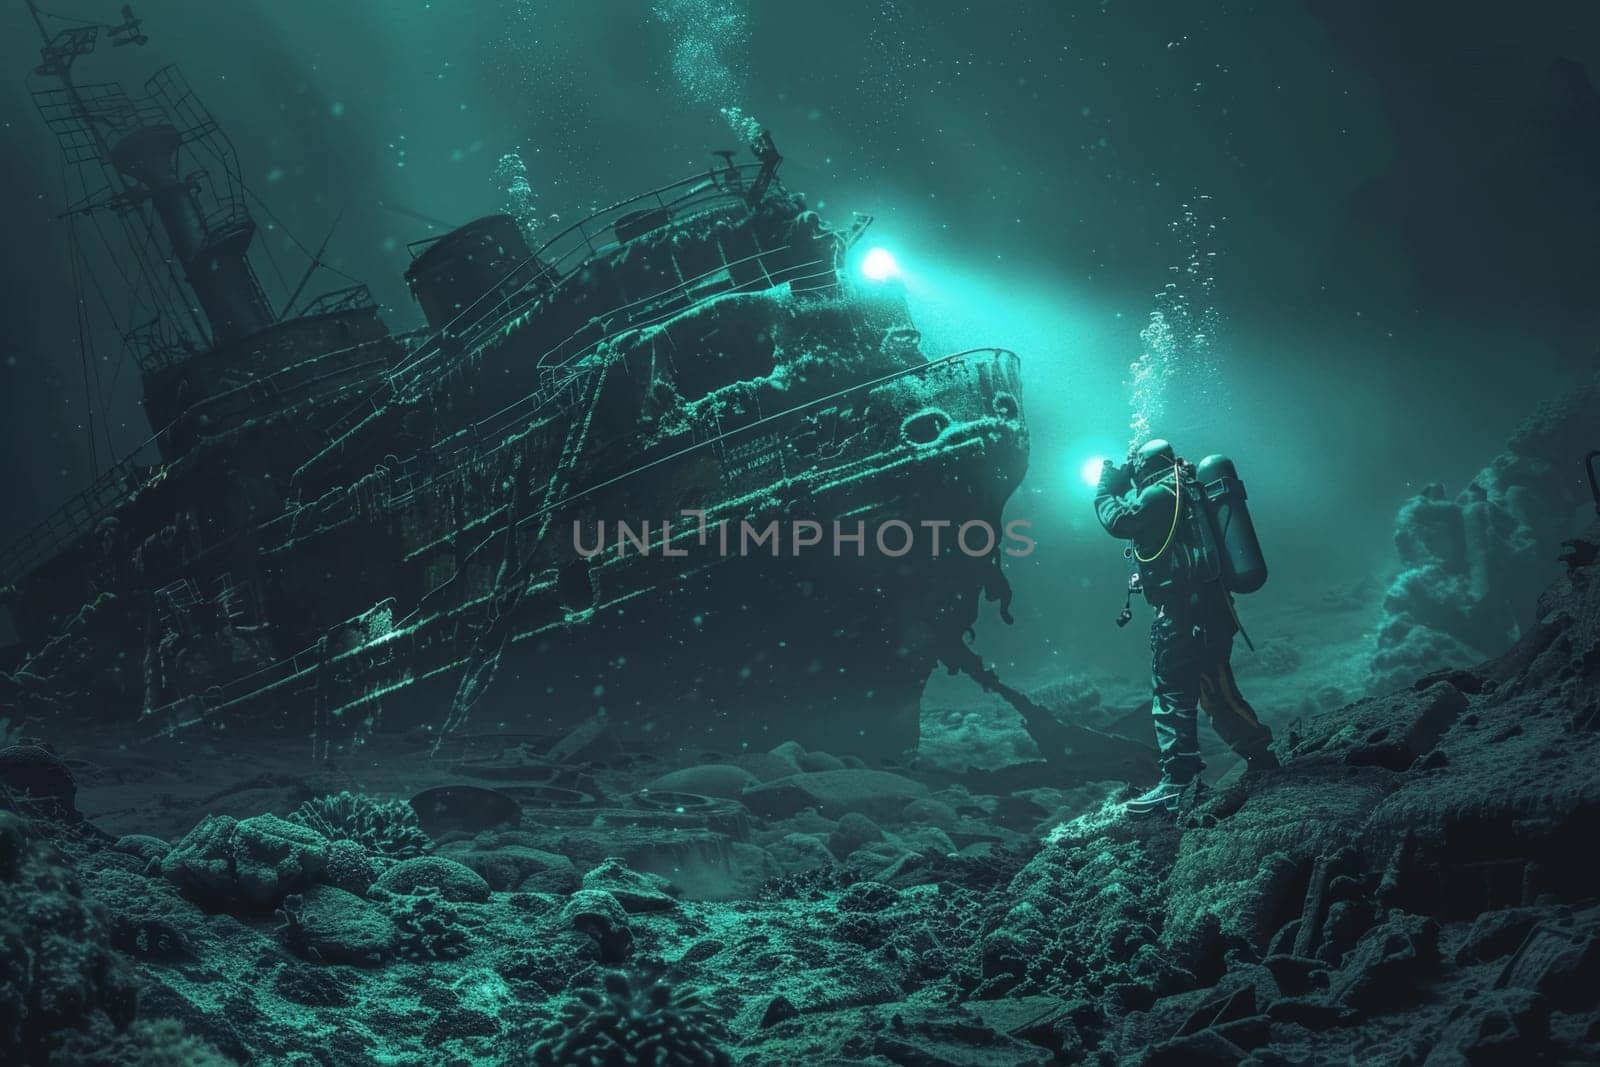 A diver with a flashlight explores the haunting depths of the ocean, casting light on the eerie remains of a sunken shipwreck